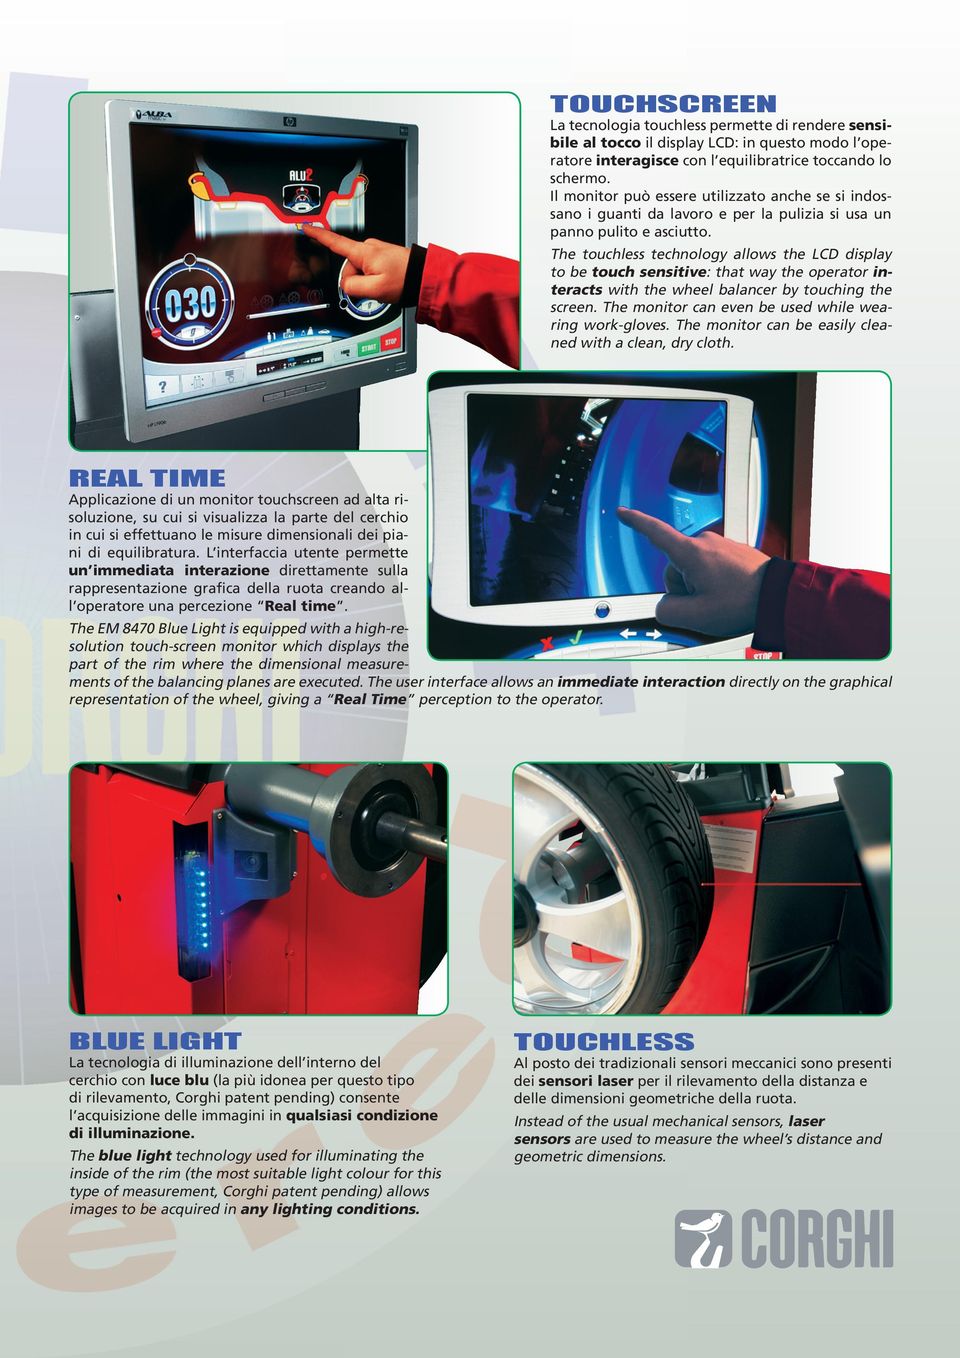 The touchless technology allows the LCD display to be touch sensitive: that way the operator interacts with the wheel balancer by touching the screen.